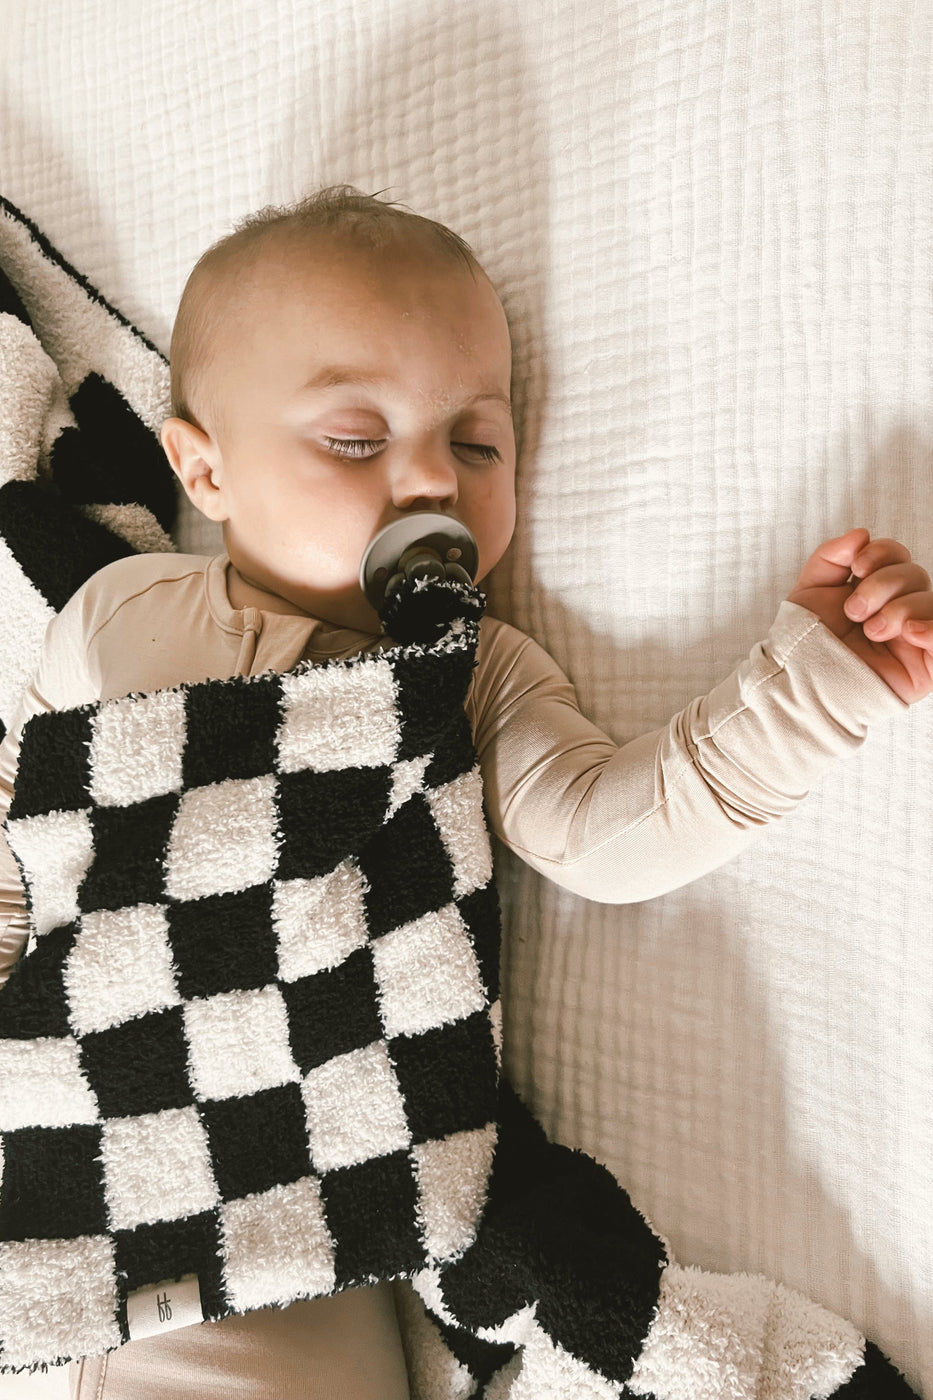 a baby sleeping with a pacifier in its mouth